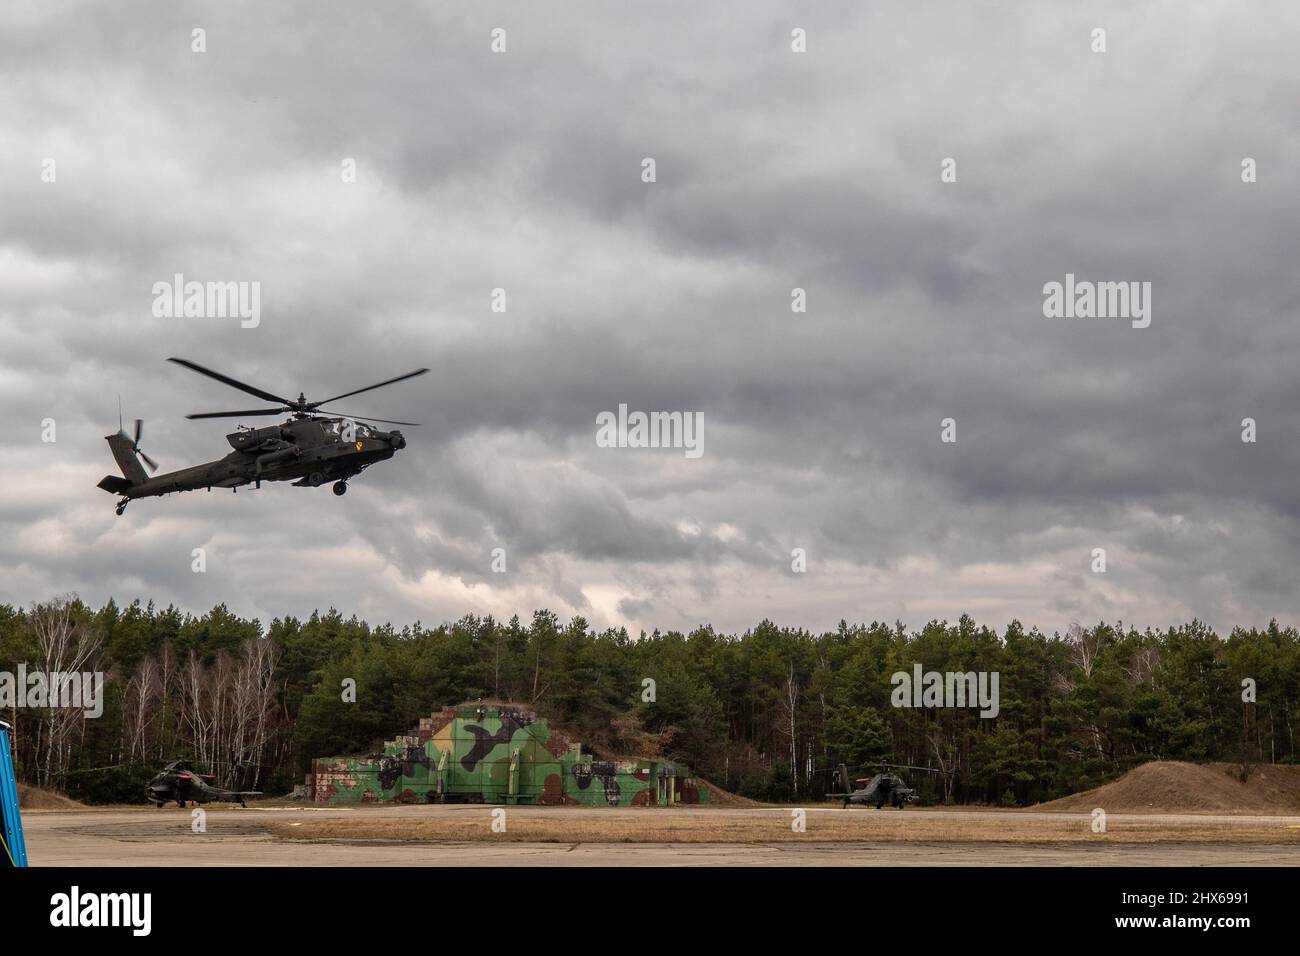 POWIDZ, Poland – 1st Air Cavalry Brigade AH64 Apache helicopter lands in Powidz, Poland, Feb. 26, 2022.     1st Air Cavalry Brigade, which is in Europe for Atlantic Resolve, moved 20 AH64 Apaches and over 400 personnel to Poland from Greece and Germany in less than 5 days to support the United States’ decision to increase its presence and activities in Poland as part of its strong and unremitting commitment to our NATO allies and partners. (U.S. Army Photo by Capt. Taylor Criswell) Stock Photo